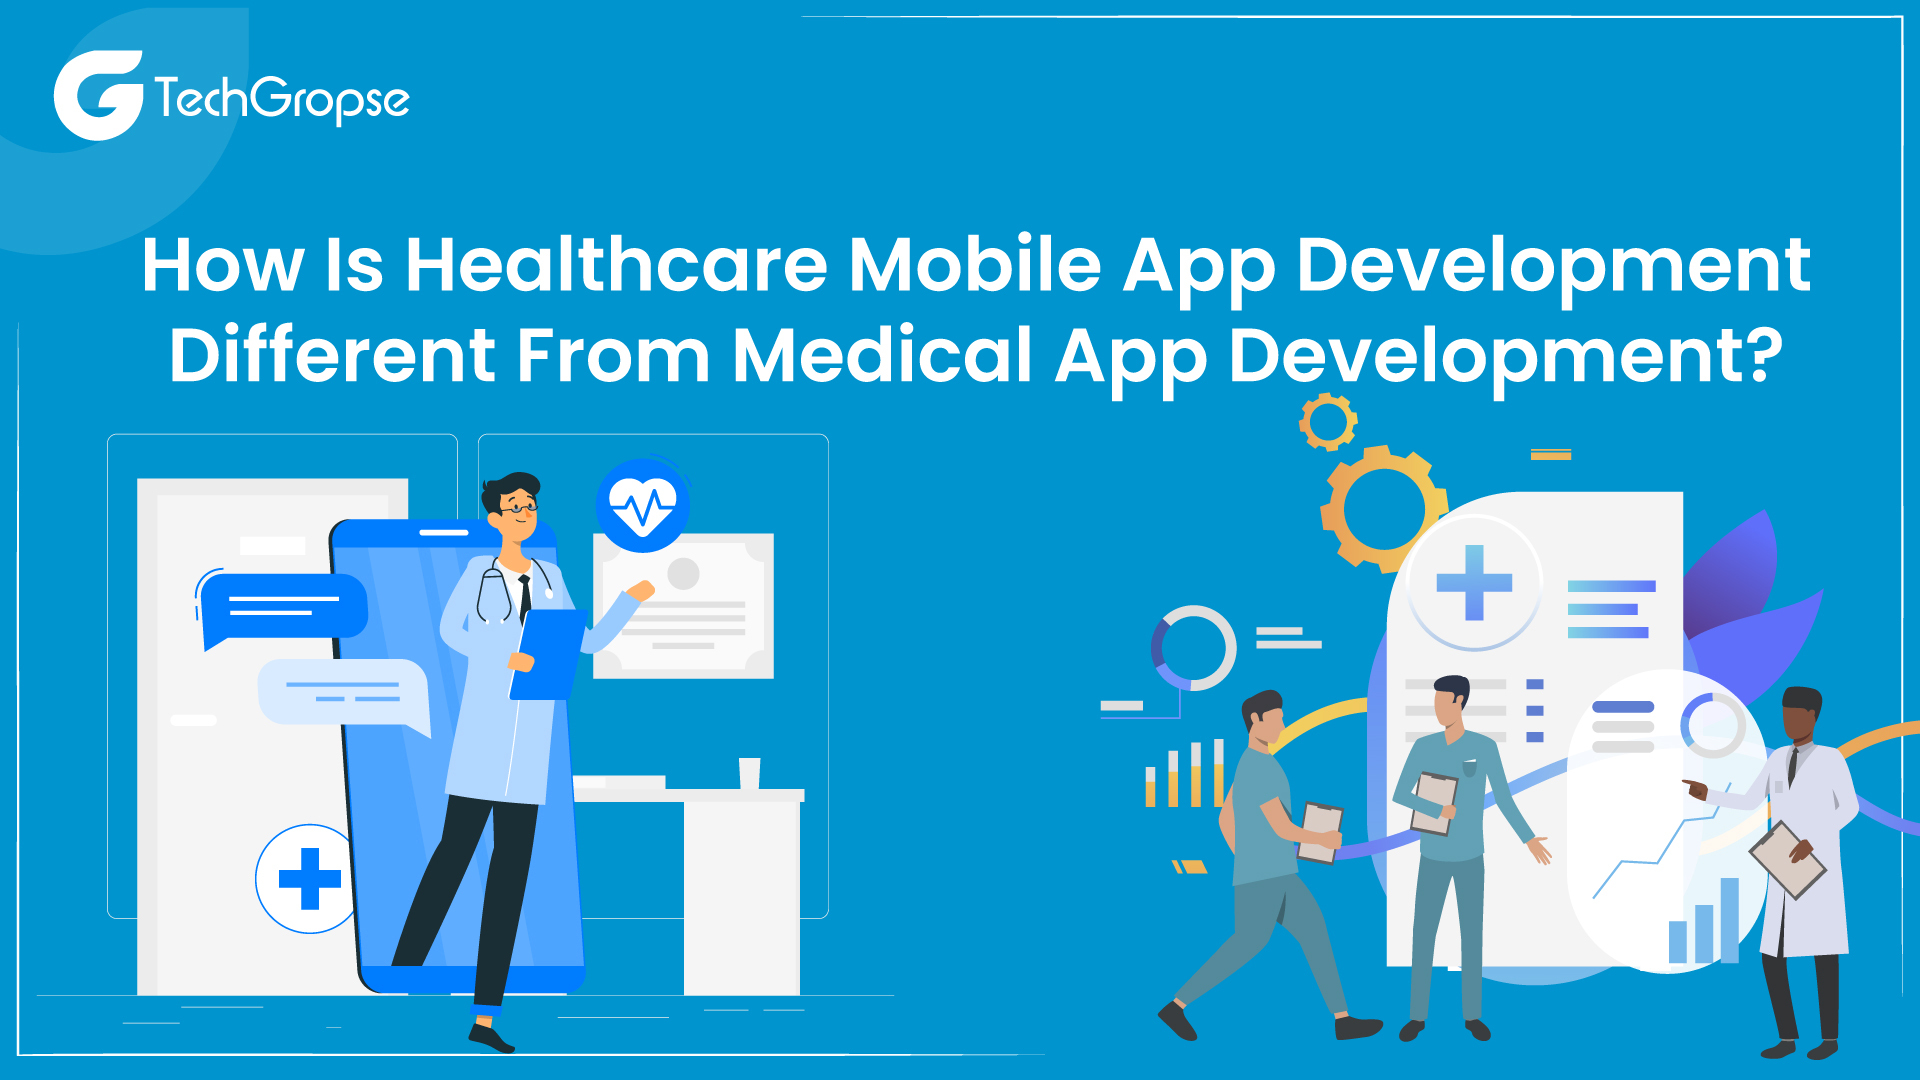 How Is Healthcare Mobile App Development Different From Medical App Development?